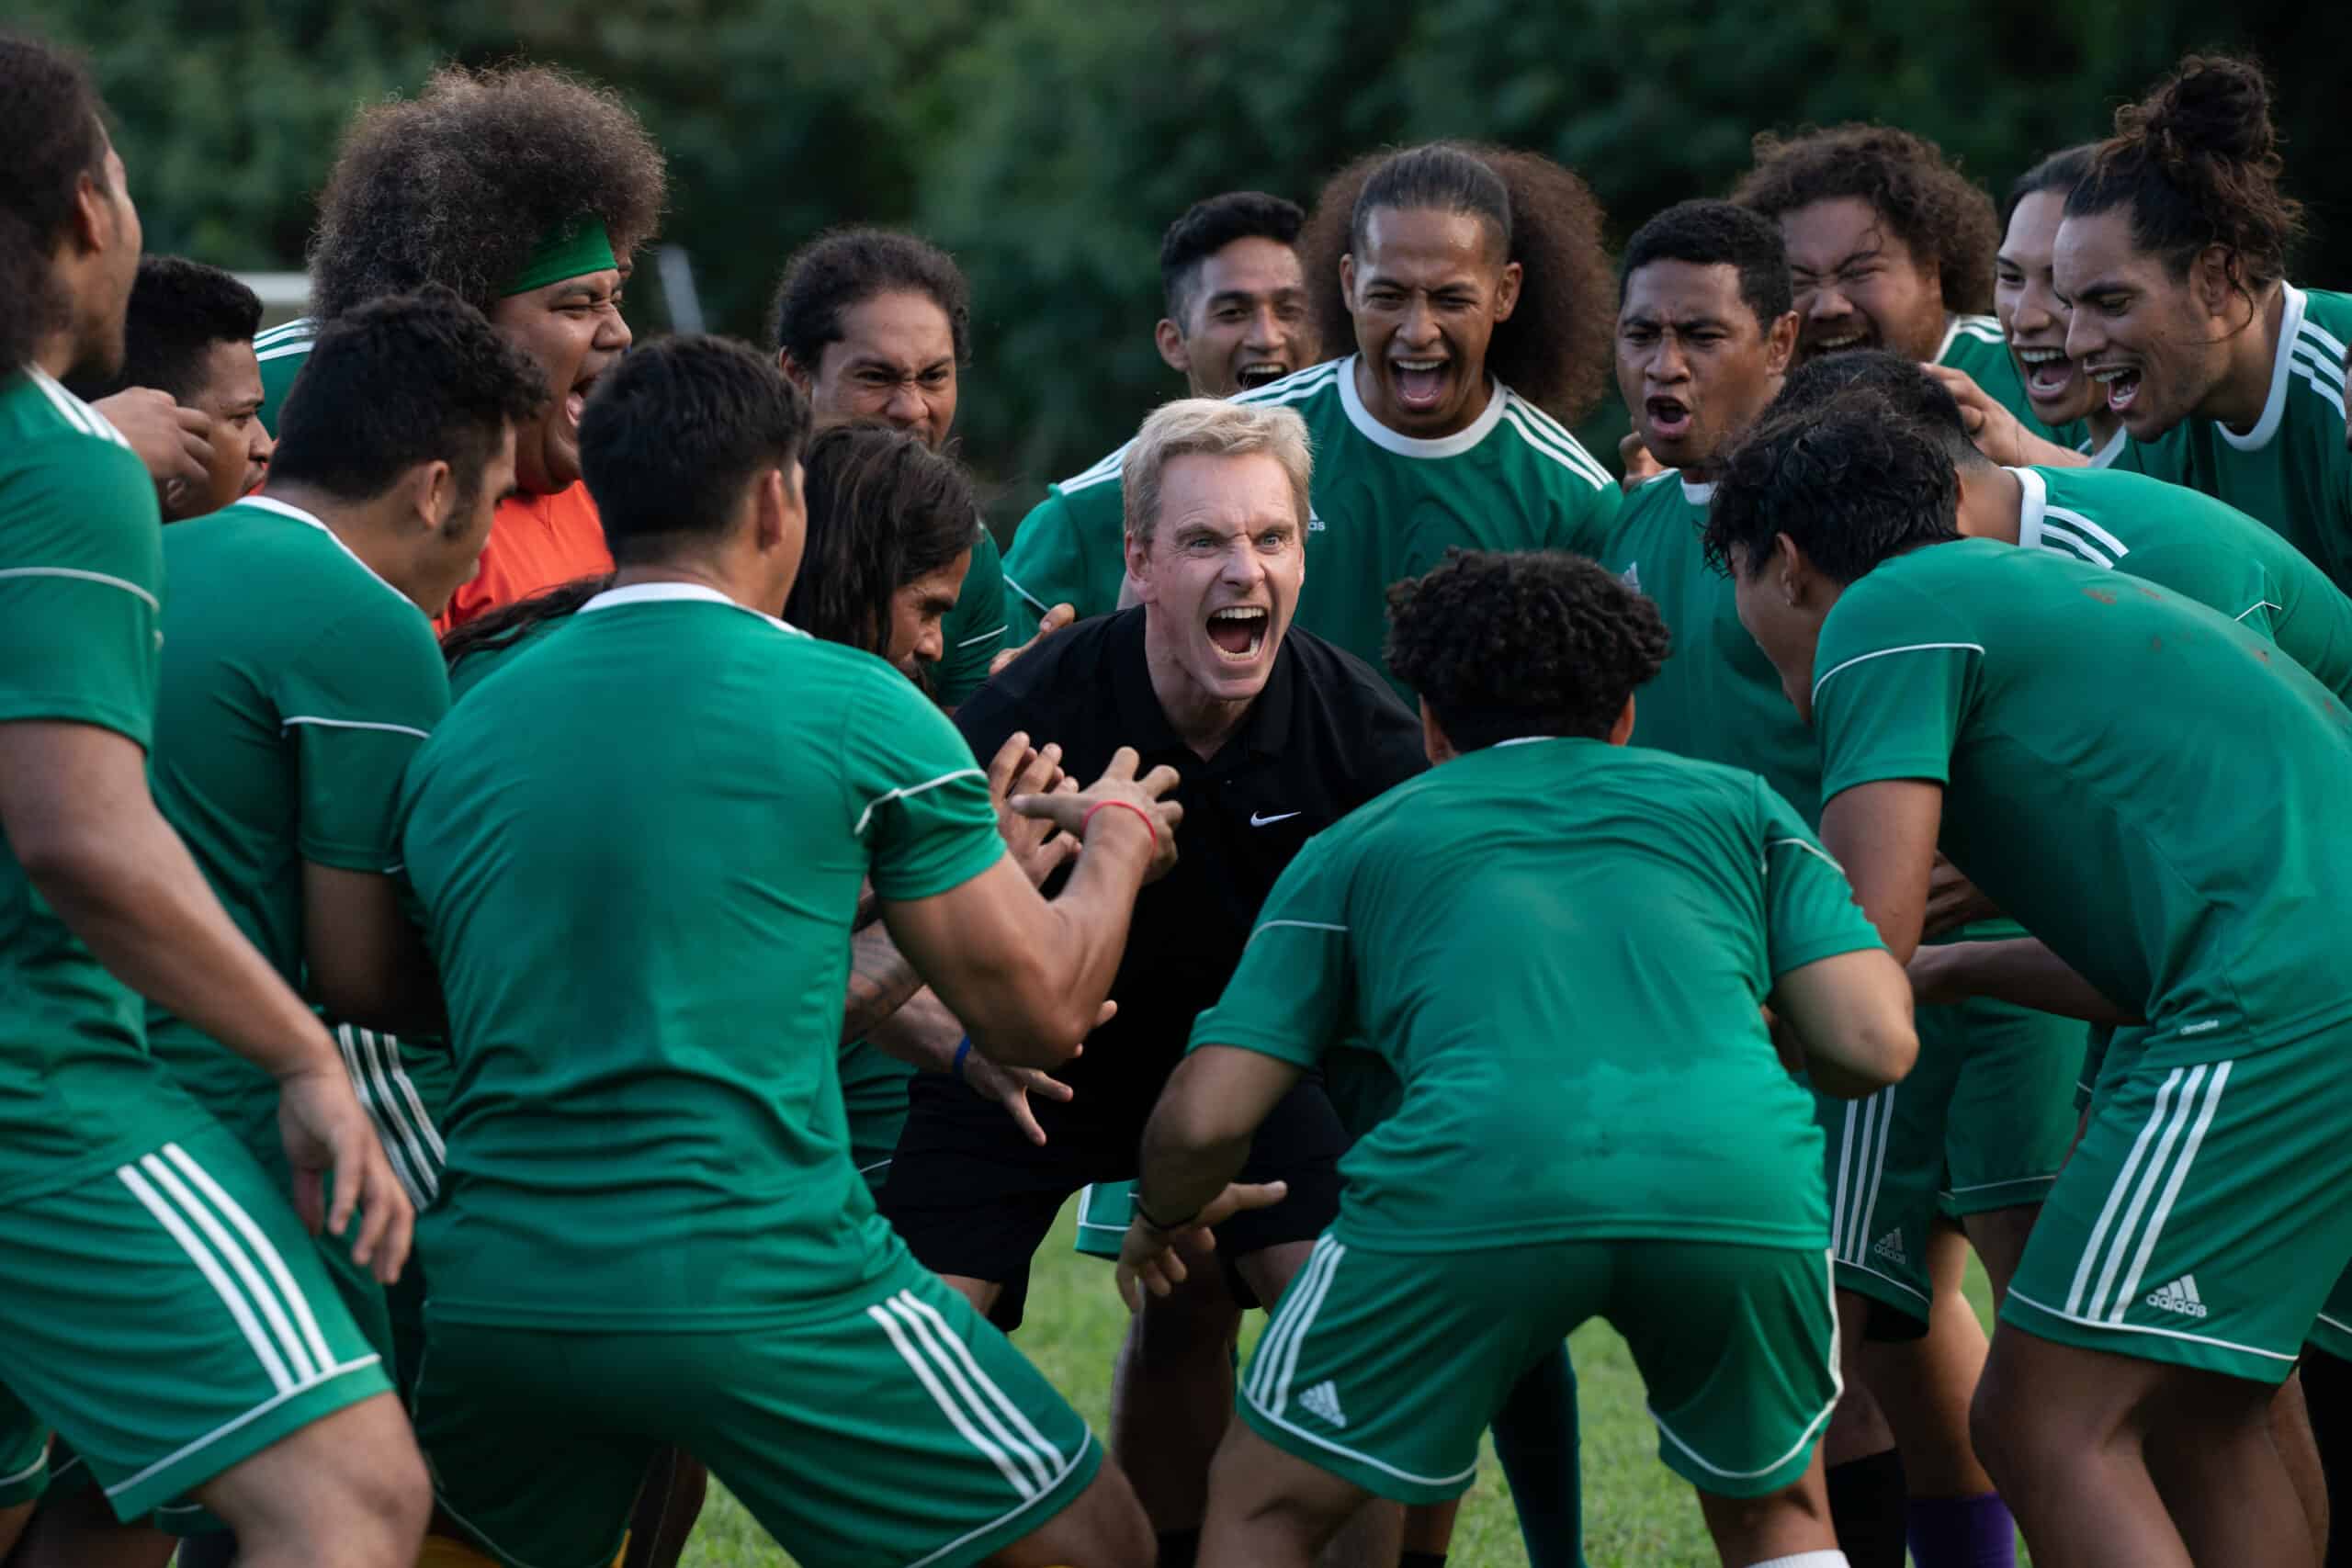 American Samoa team and Michael Fassbender in Next Goal Wins.